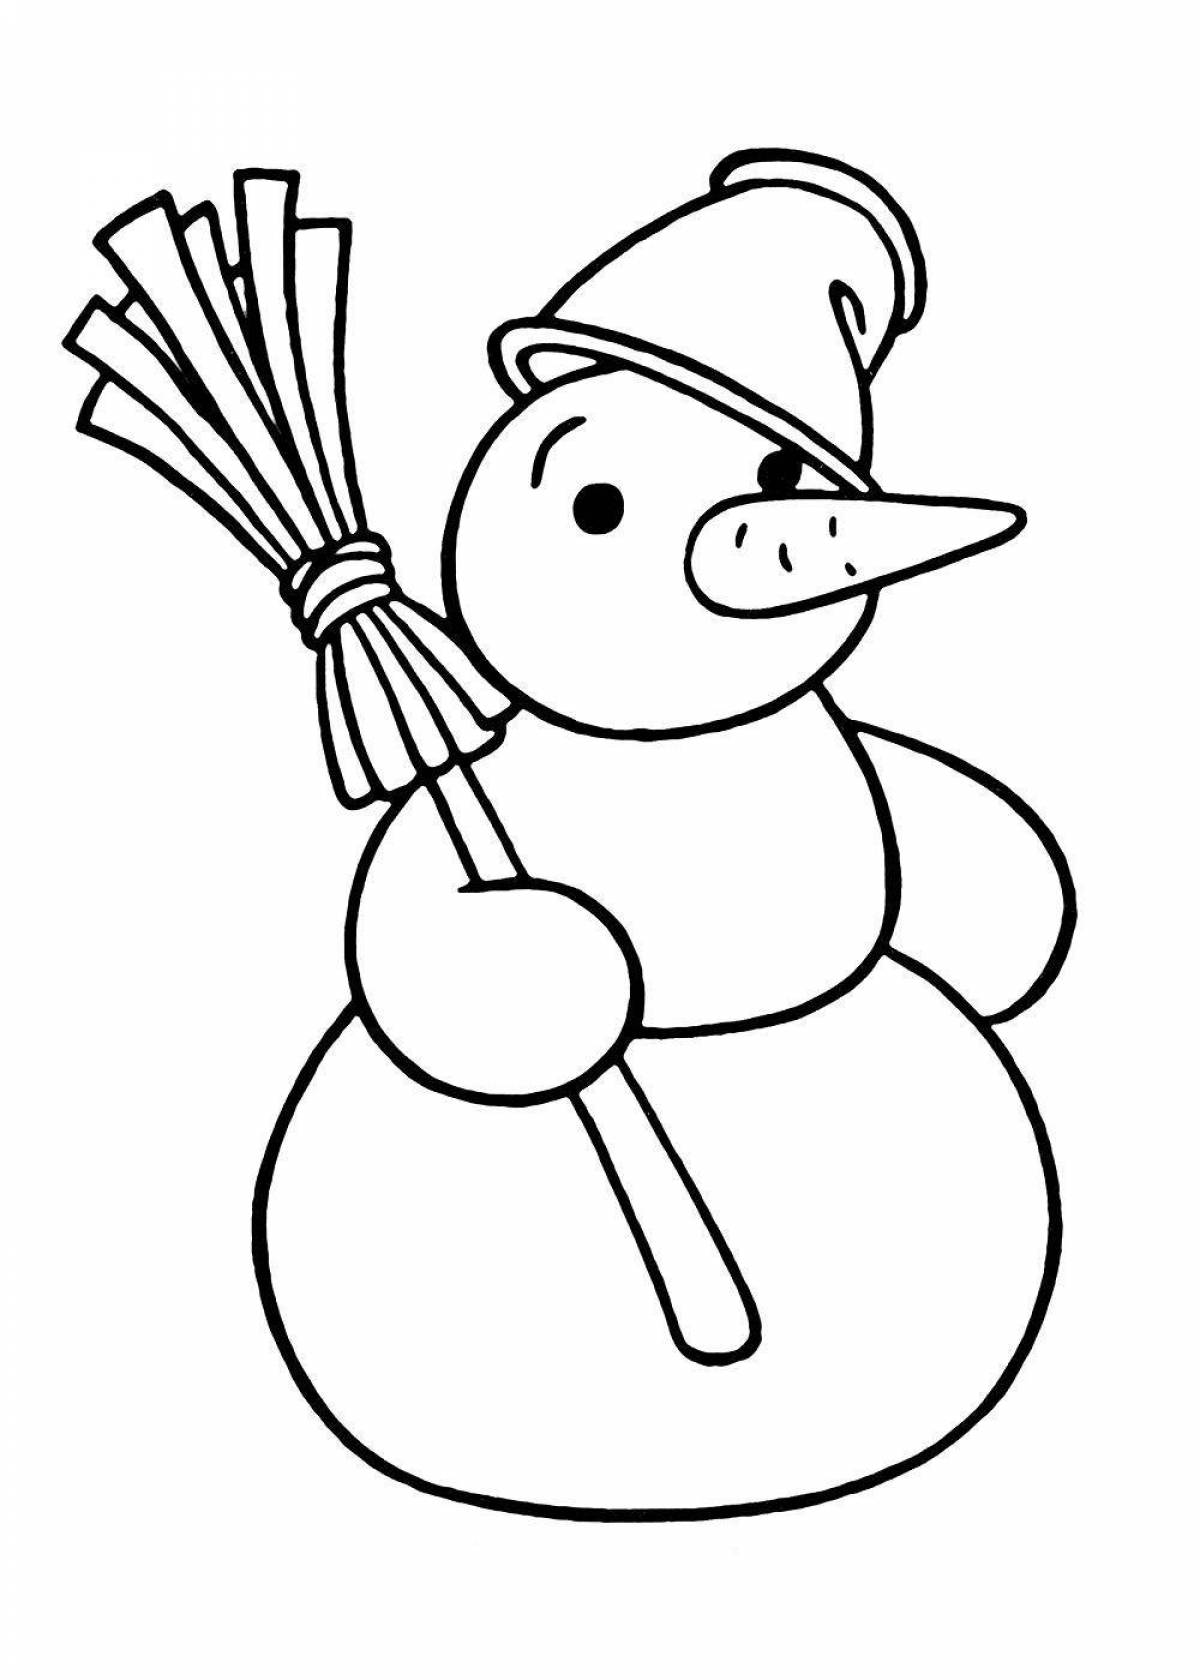 Animated winter coloring book for children 2-3 years old